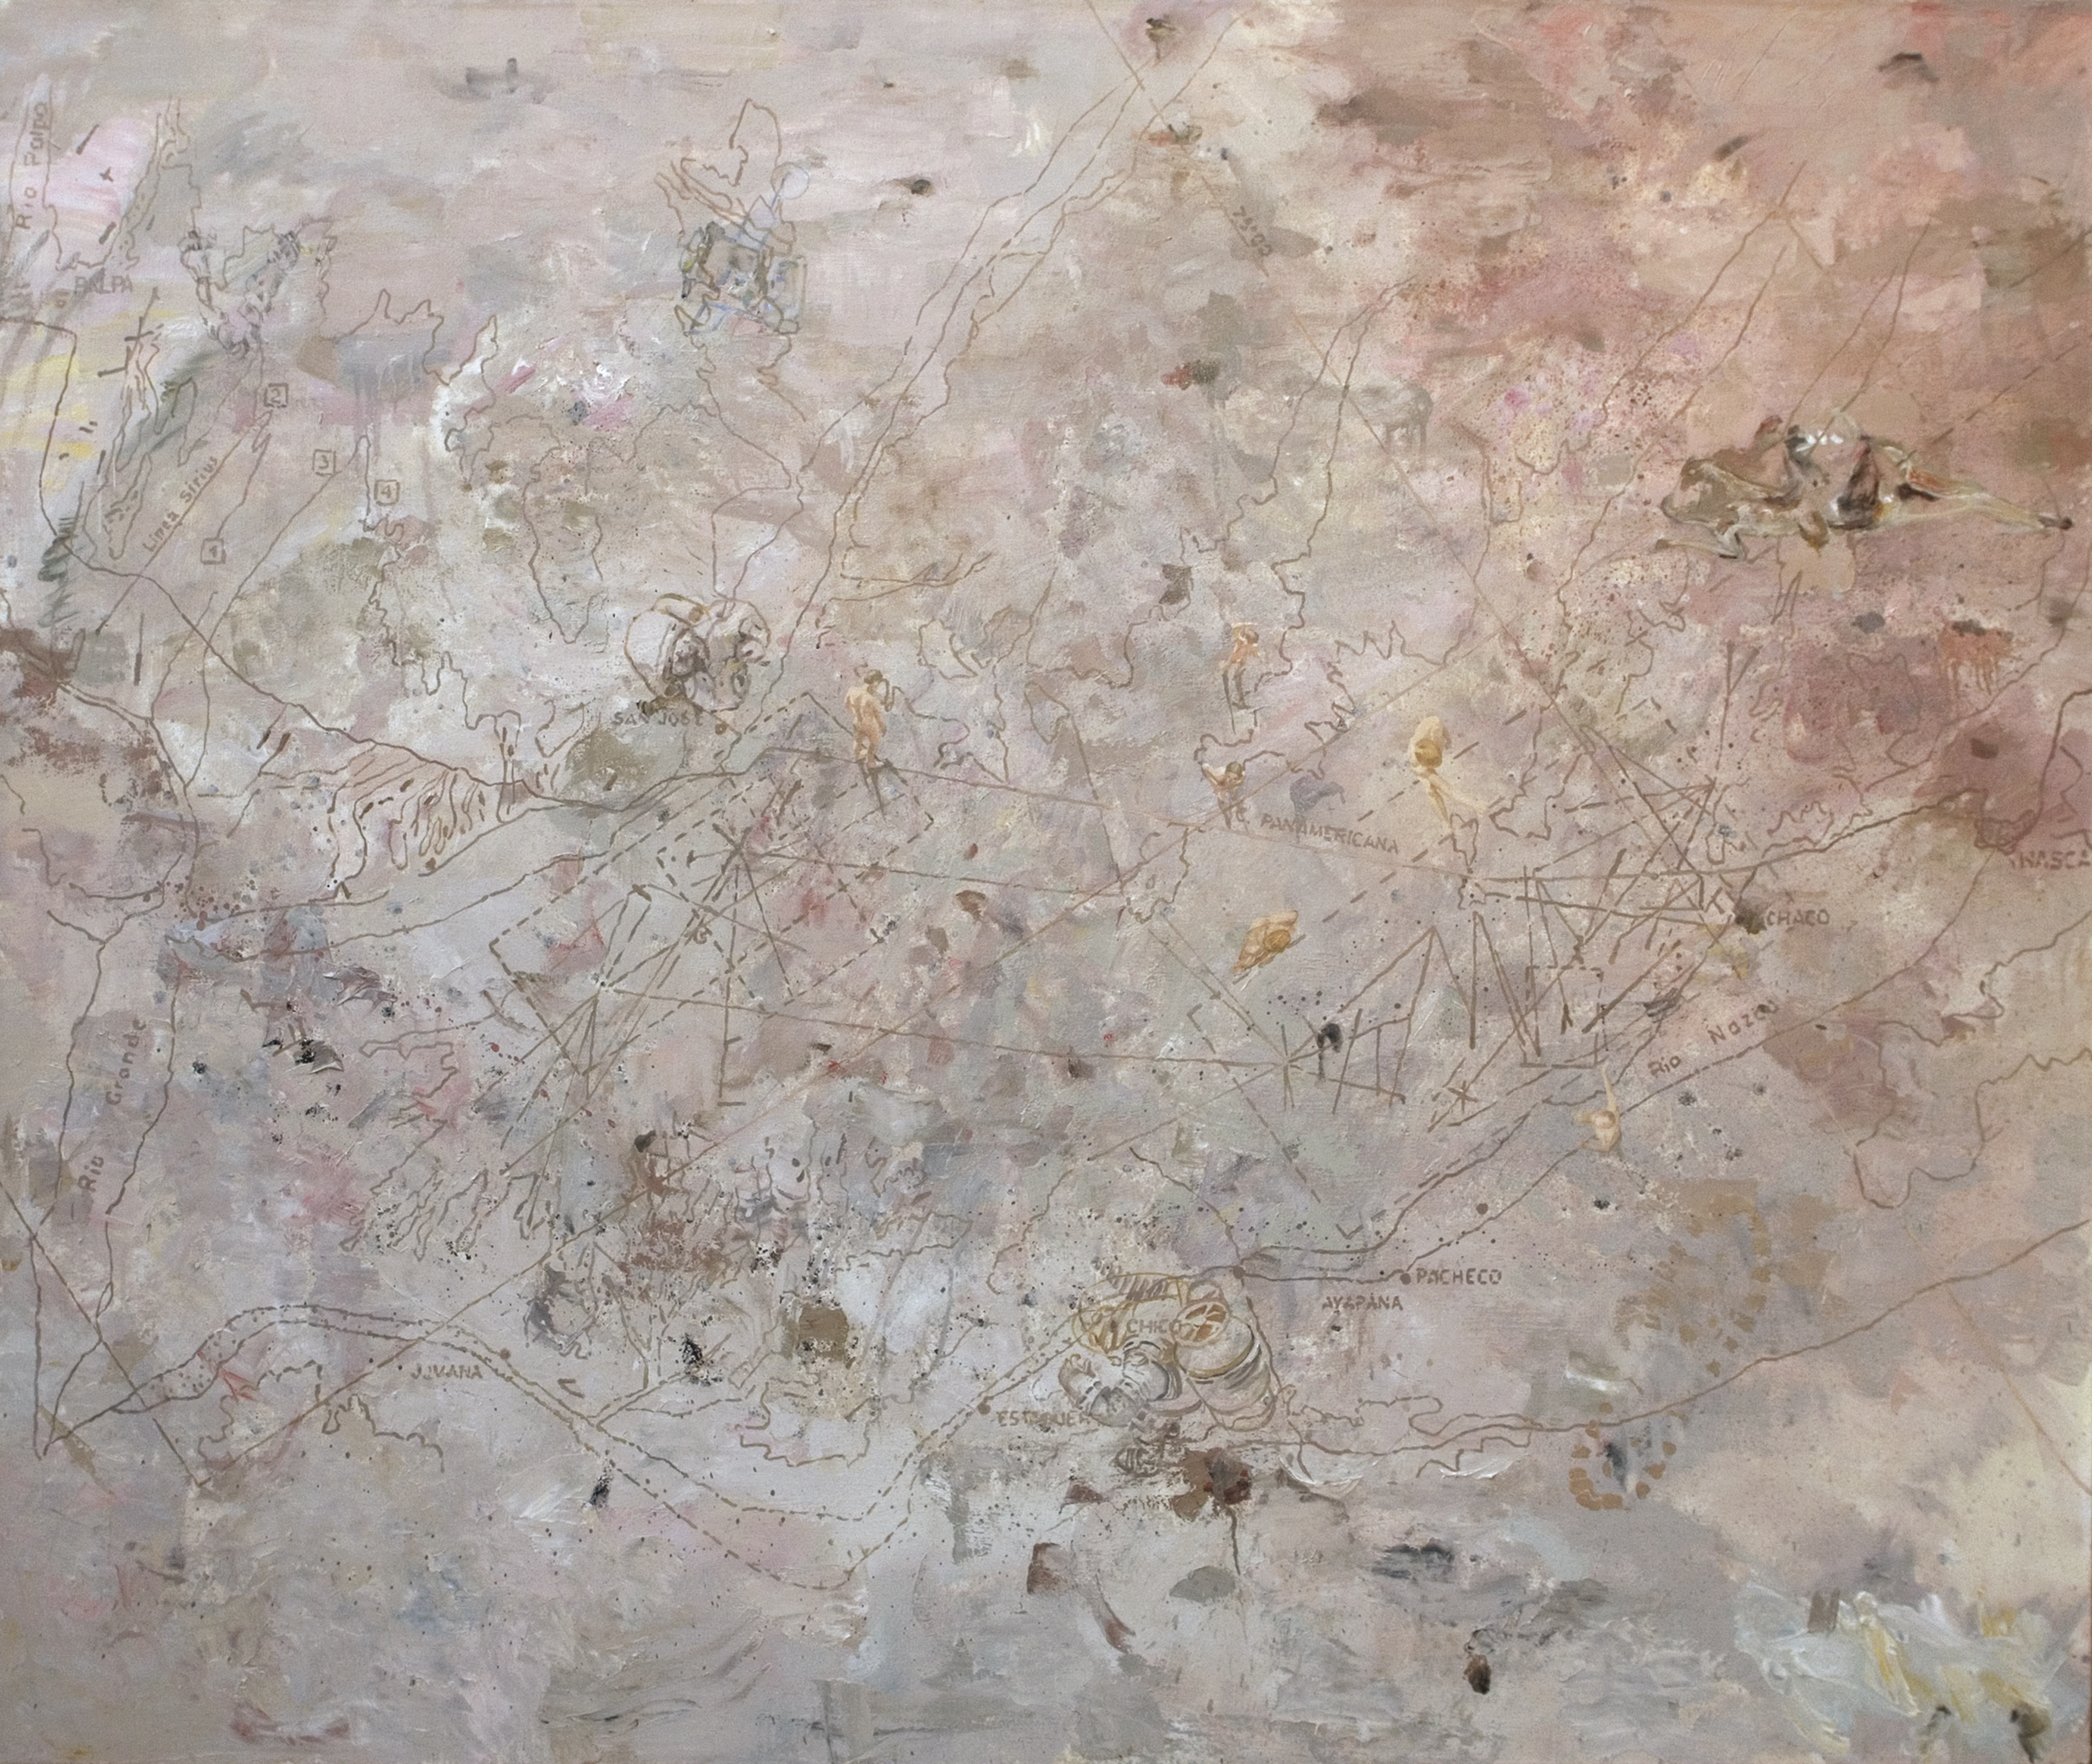 Westward from us, 2009, oil on canvas, 160 x 190 cm